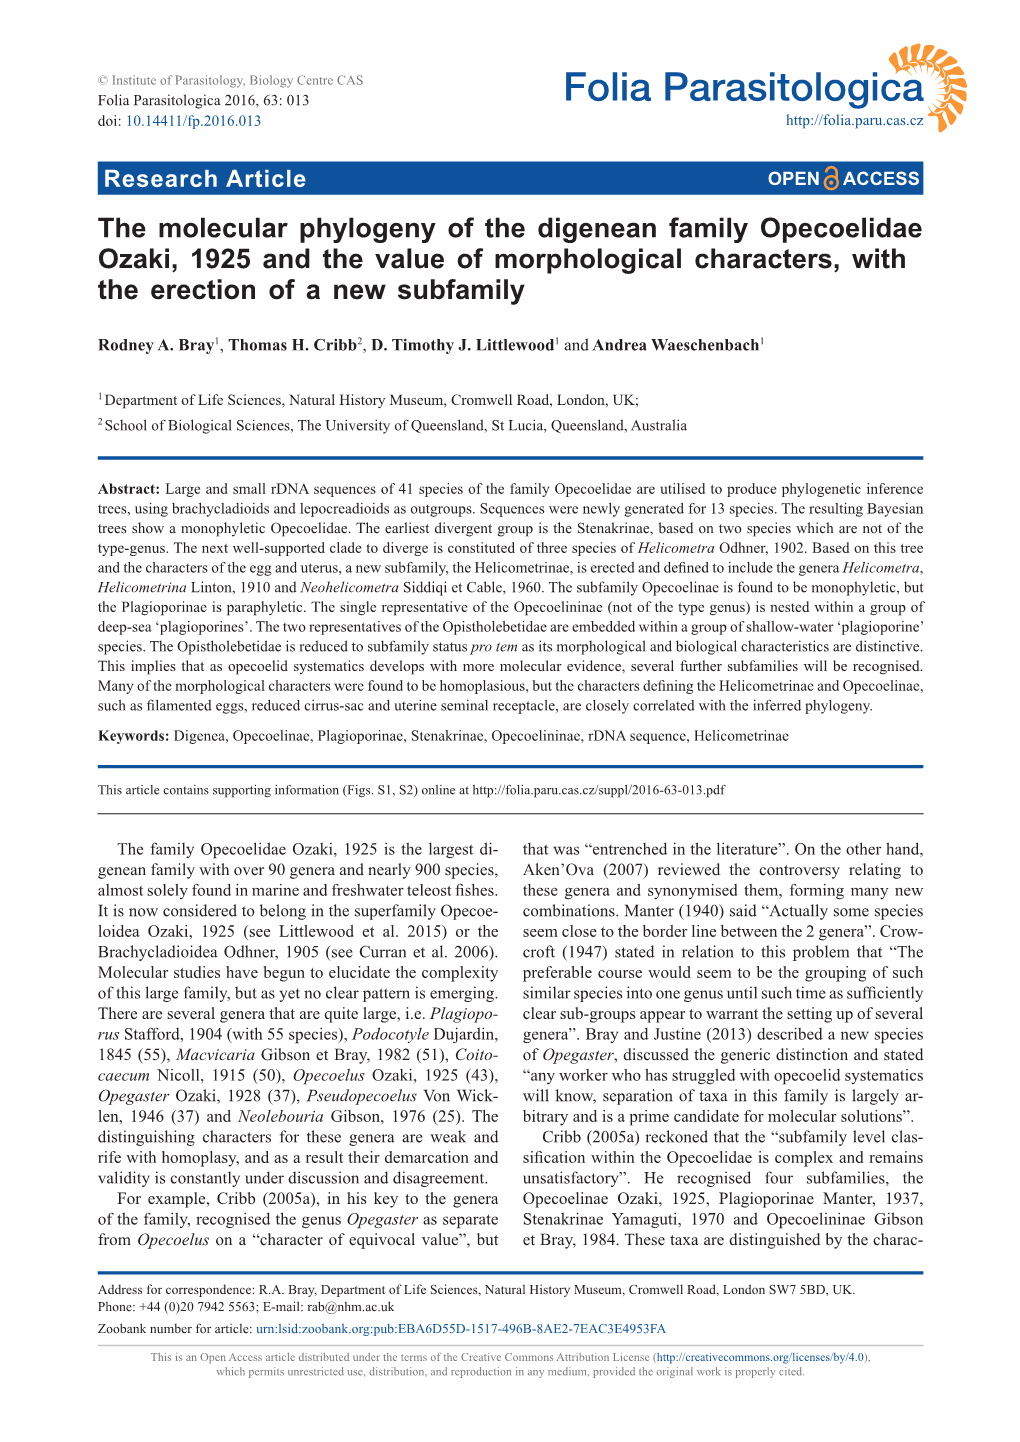 The Molecular Phylogeny of the Digenean Family Opecoelidae Ozaki, 1925 and the Value of Morphological Characters, with the Erection of a New Subfamily